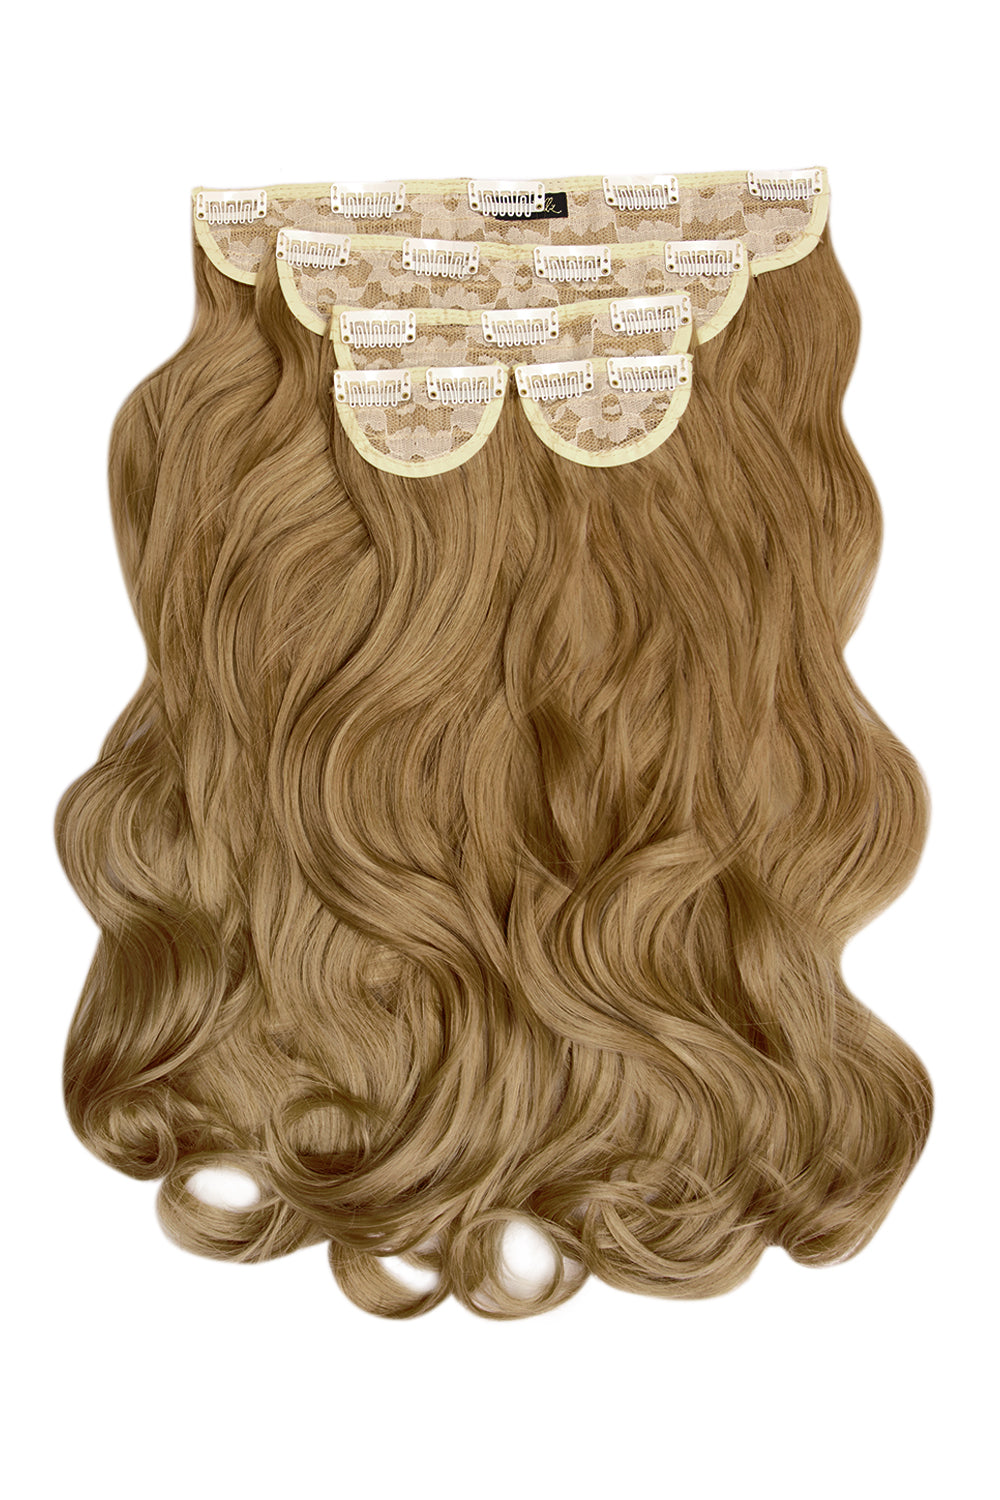 Super Thick 22" 5 Piece Natural Wavy Clip In Hair Extensions - LullaBellz - Harvest Blonde